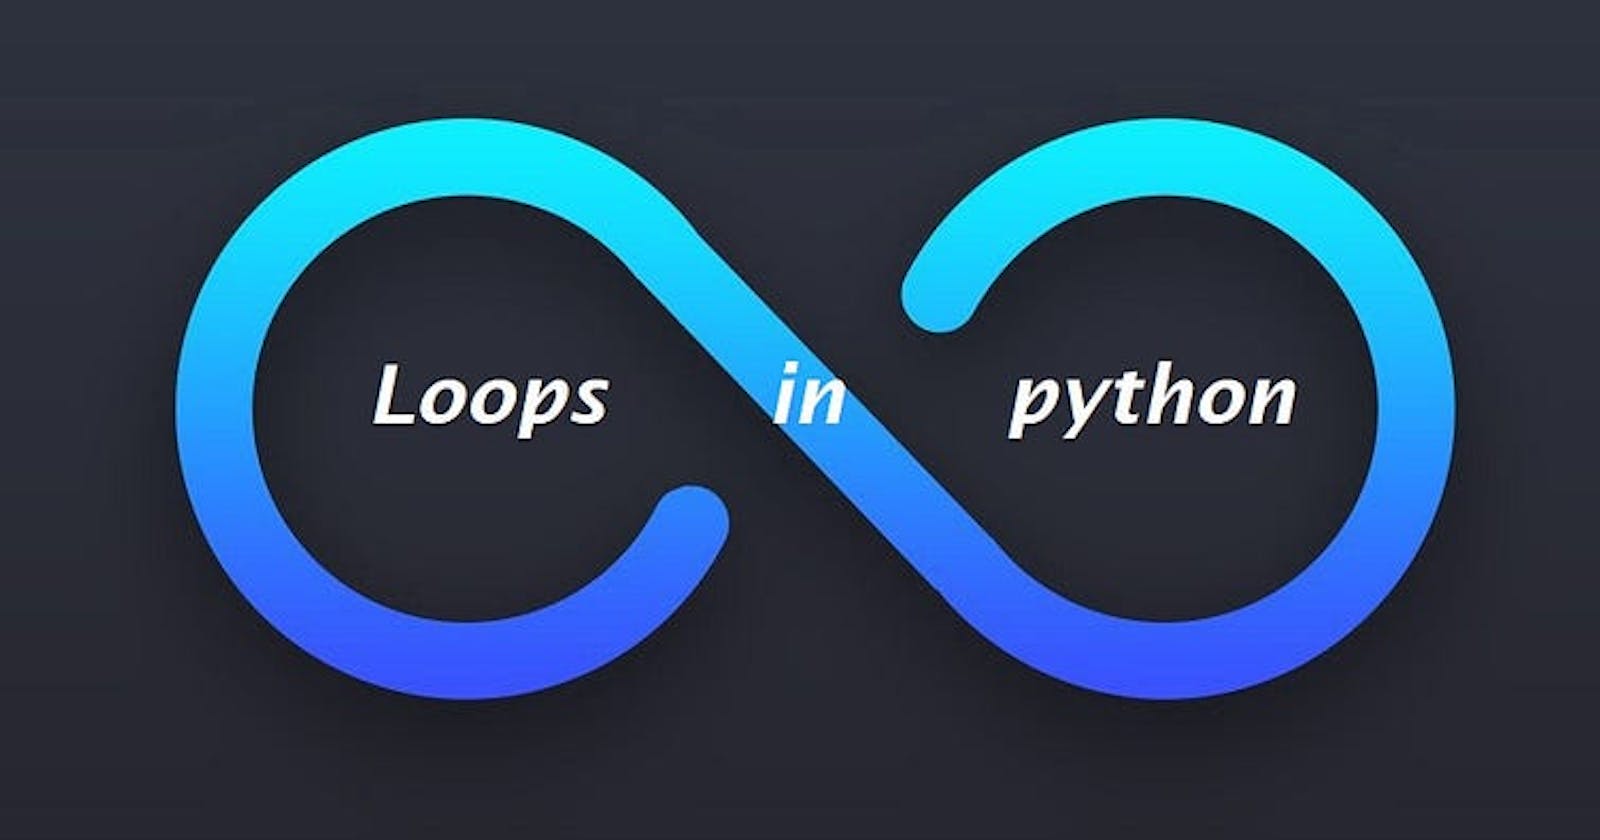 Loops in Python